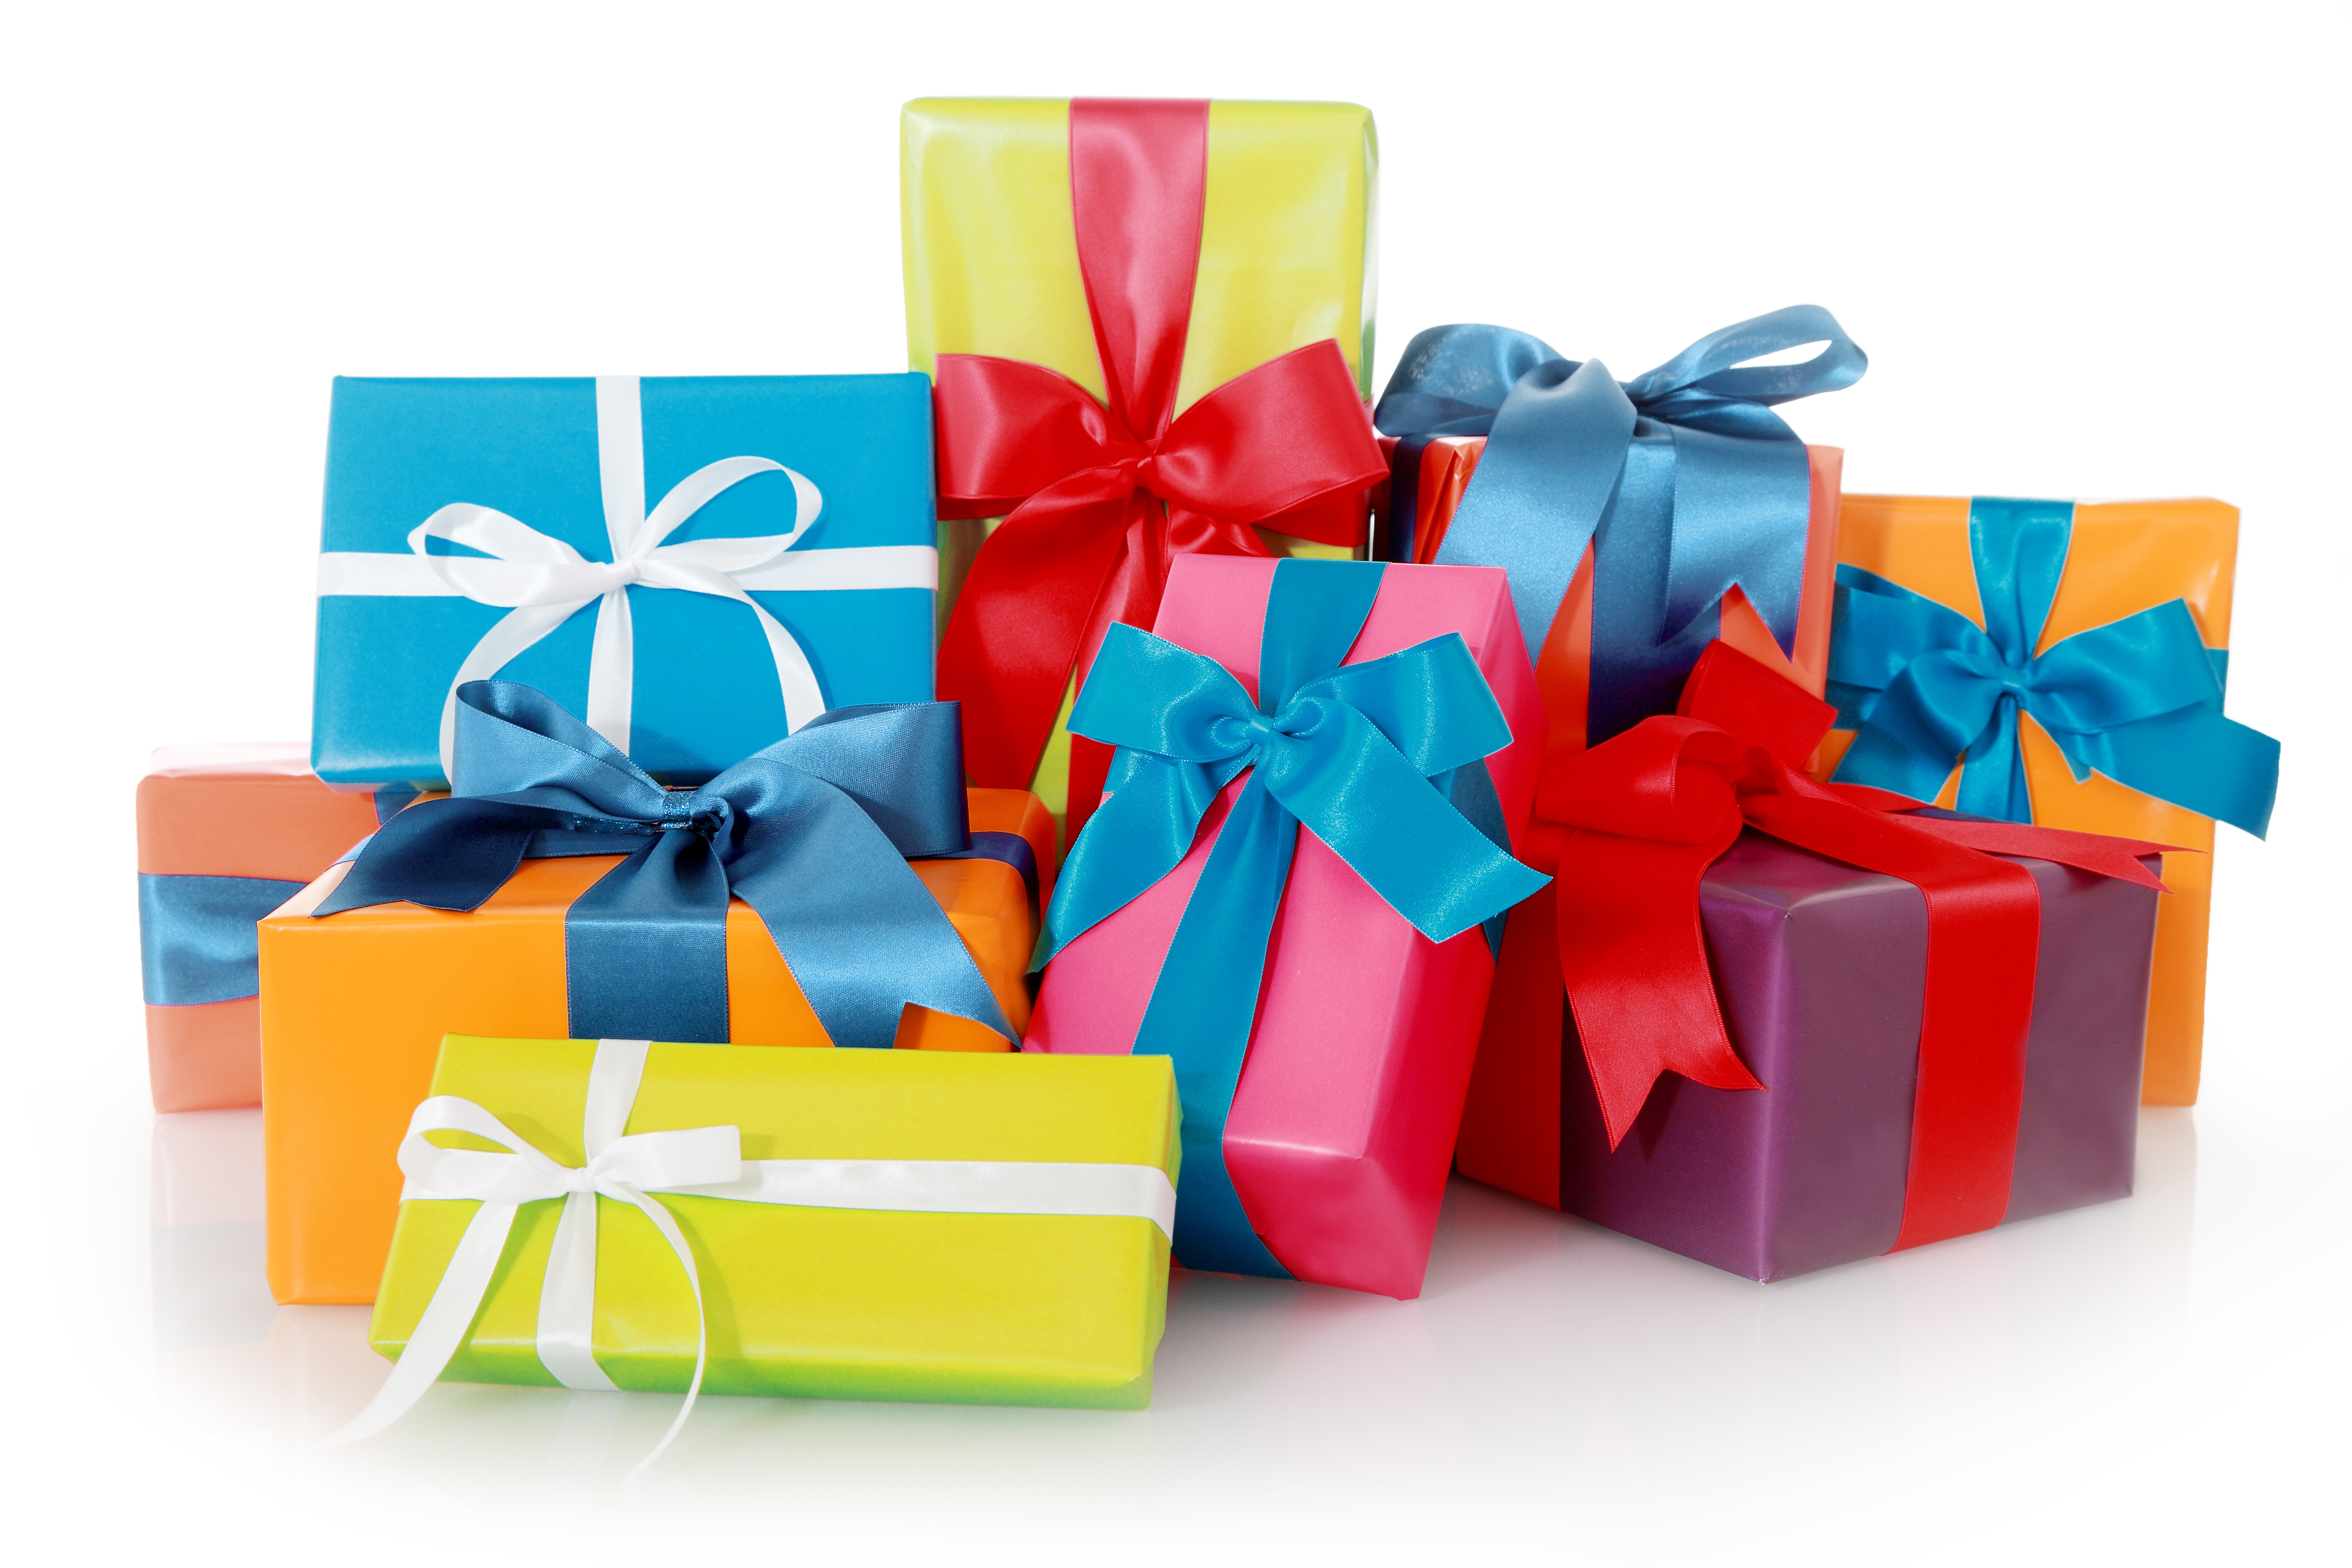 a lot of birthday presents | Shutterstock